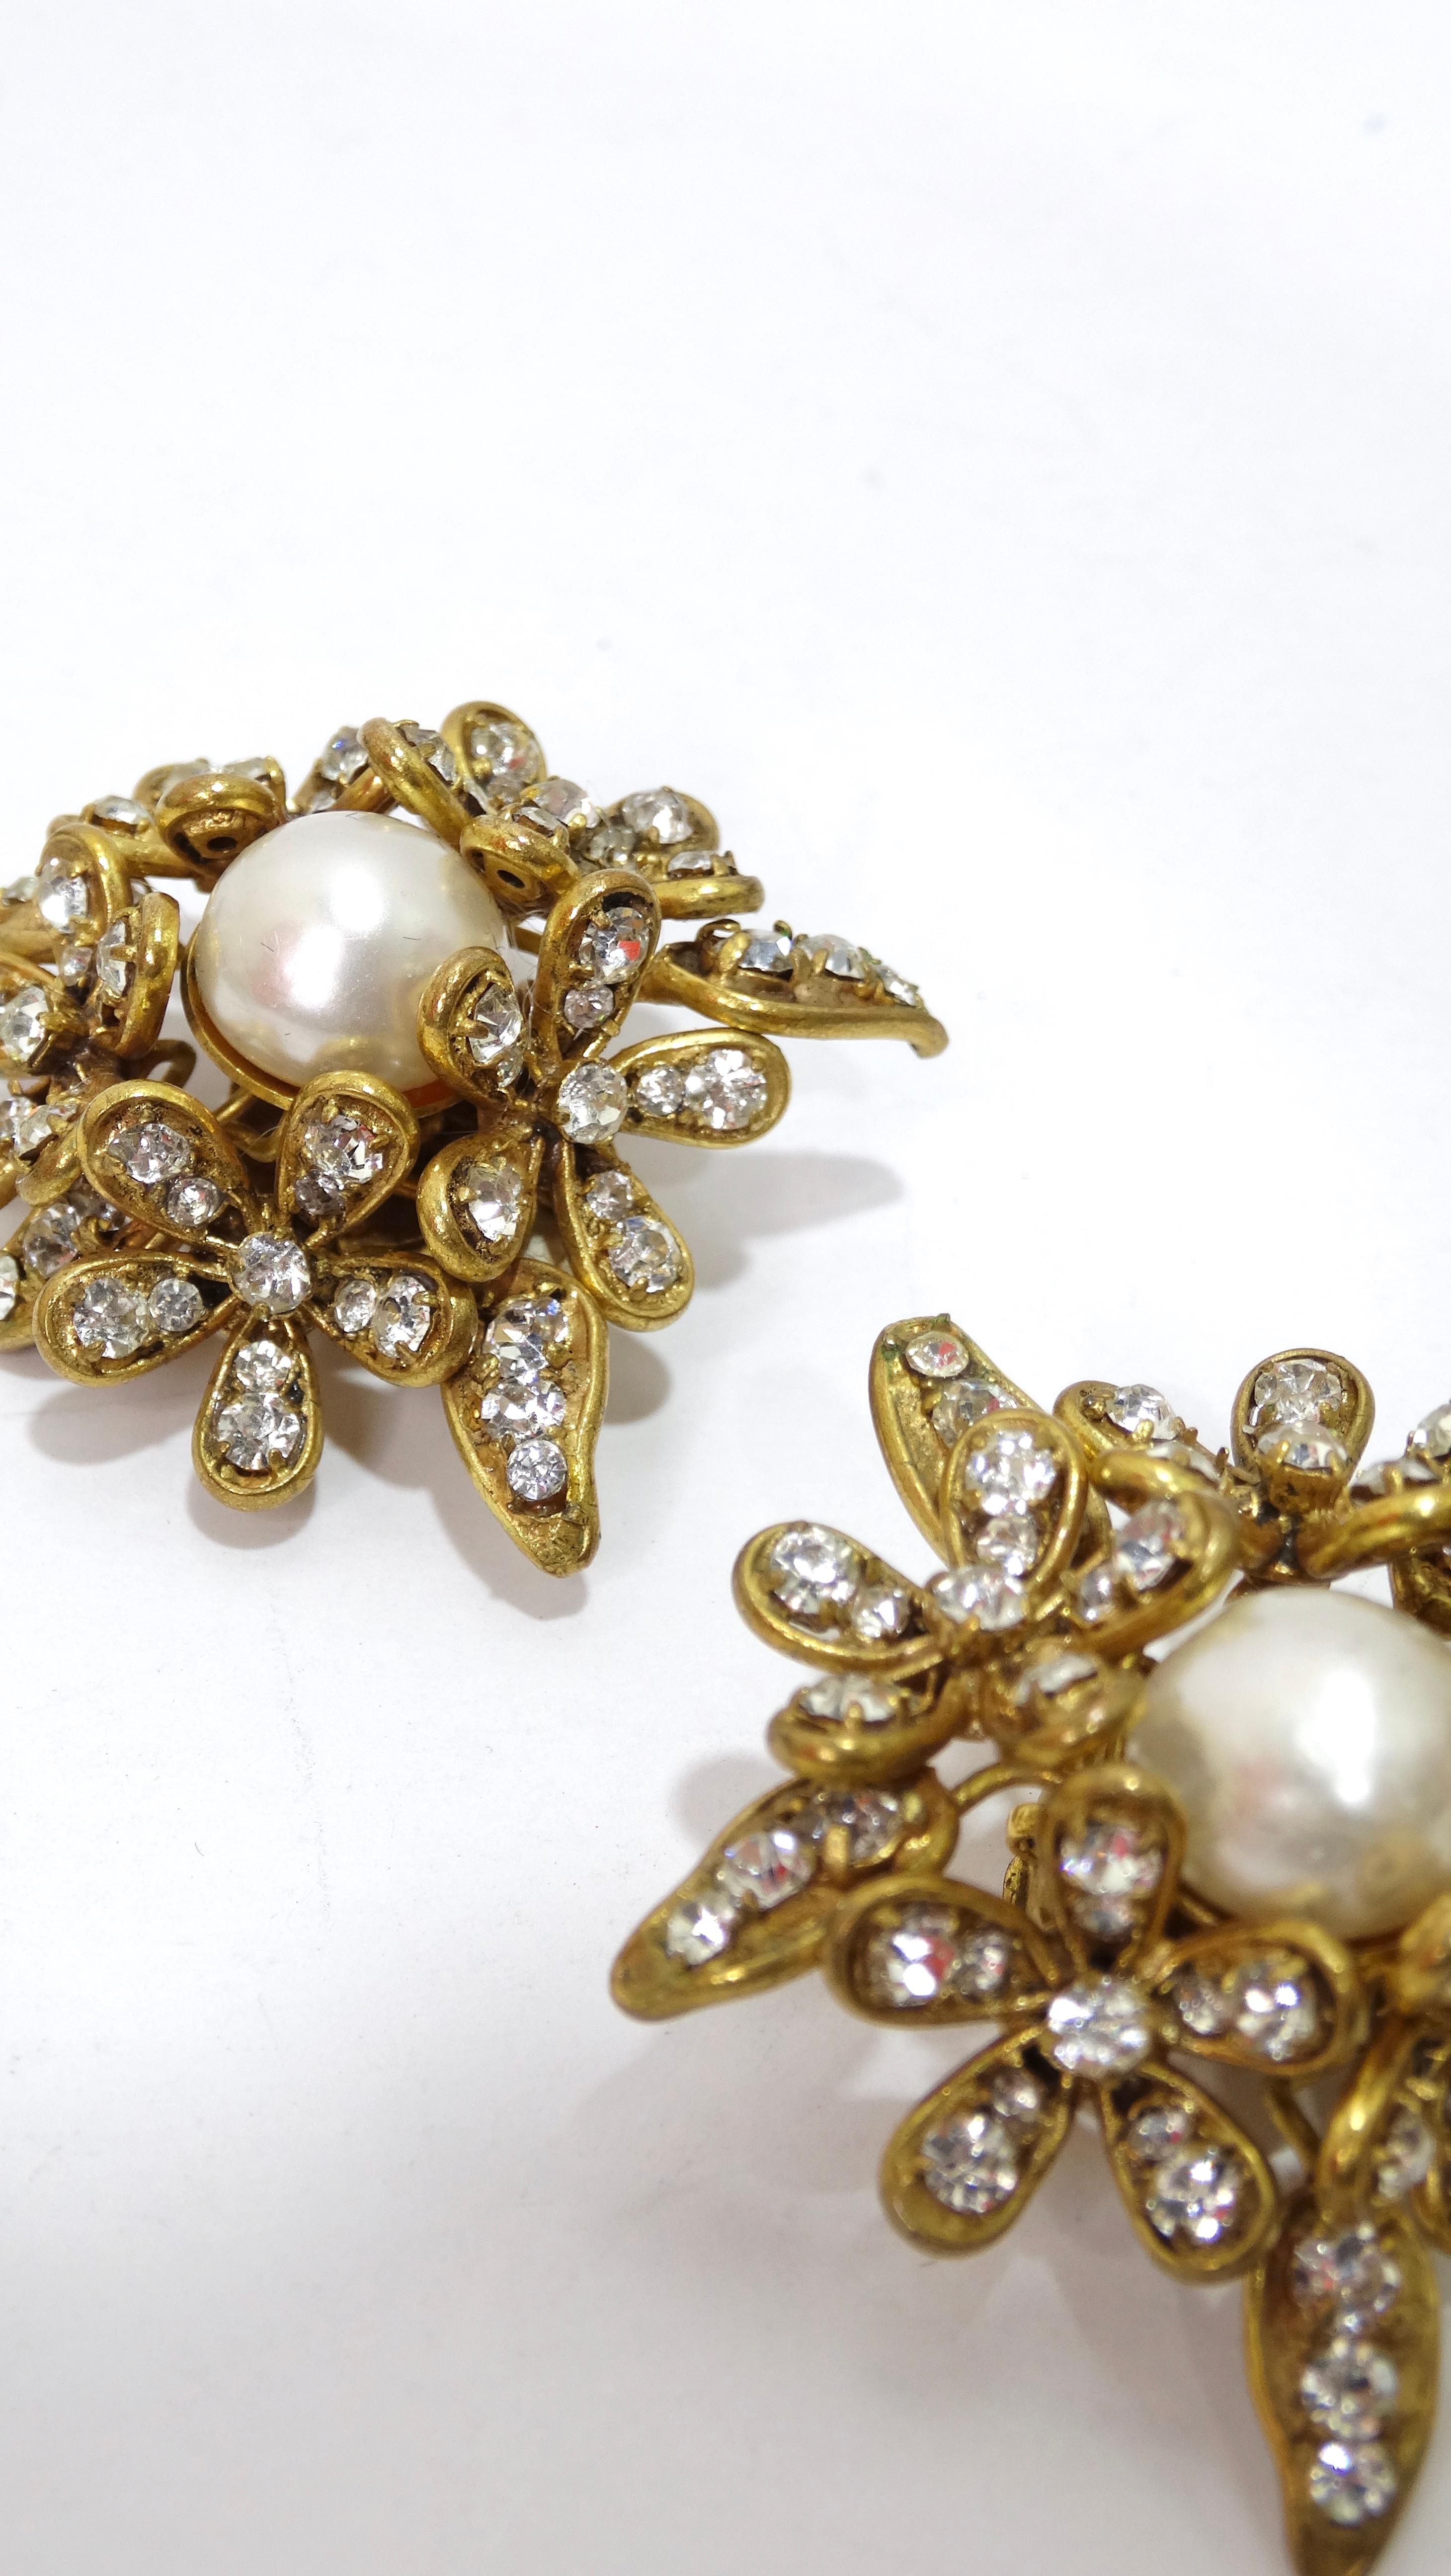 Chanel collectors right this way! This is an ultra-rare piece of Chanel jewelry you cannot find anywhere else. Doesn't it feel good to have someone no one else has? You will feel refined and confident in these vibrant gold, crystal, and pearl